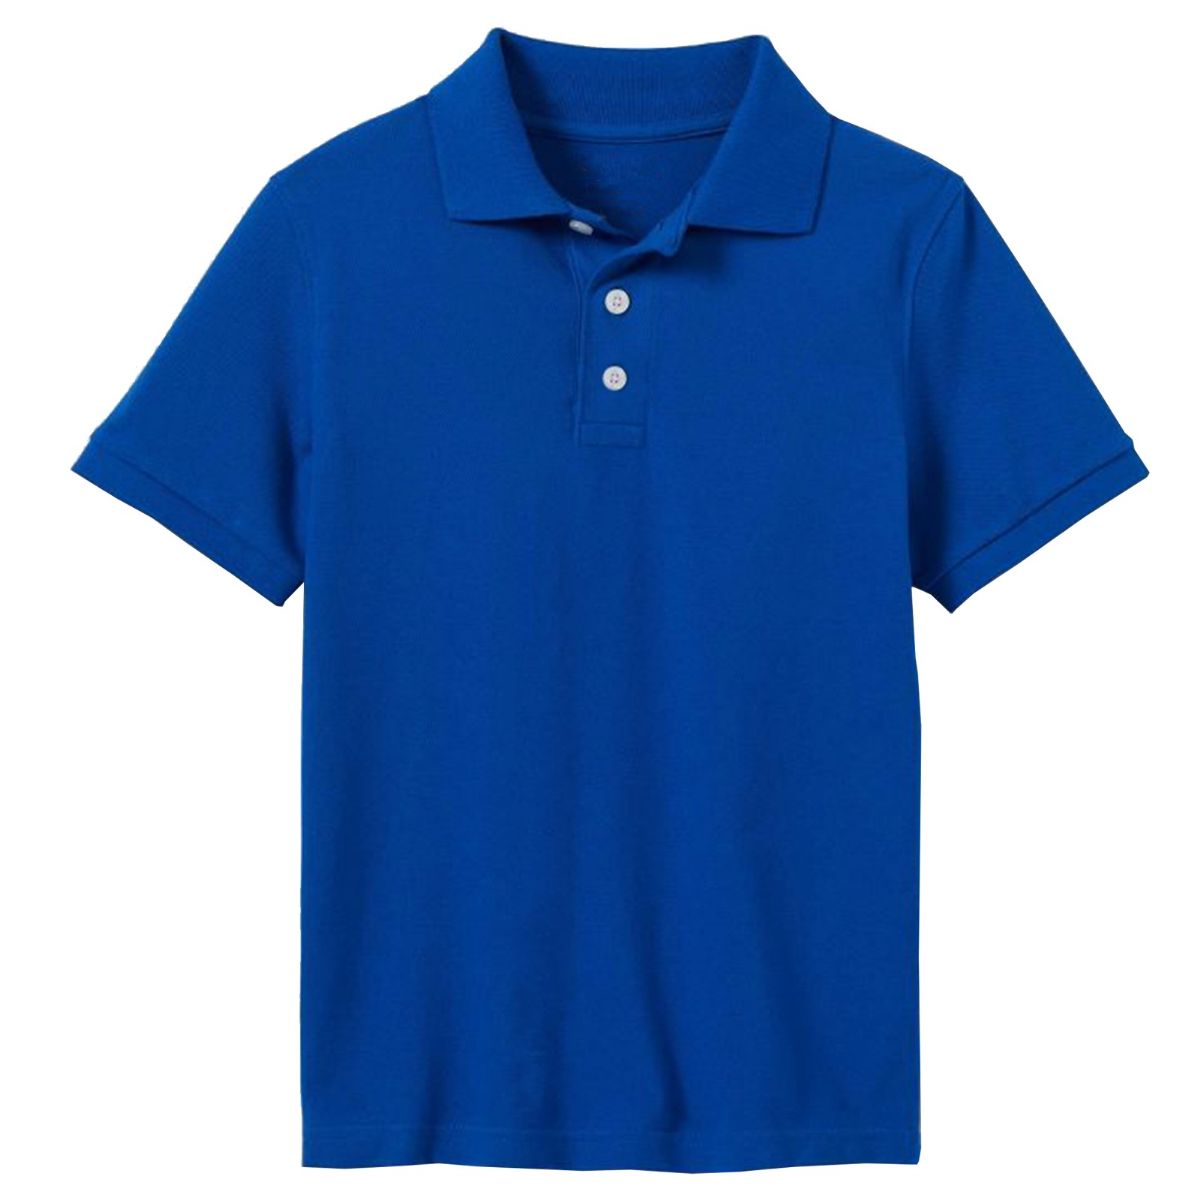 24 Pieces of Youth Polo Shirt Royal Blue In Size M